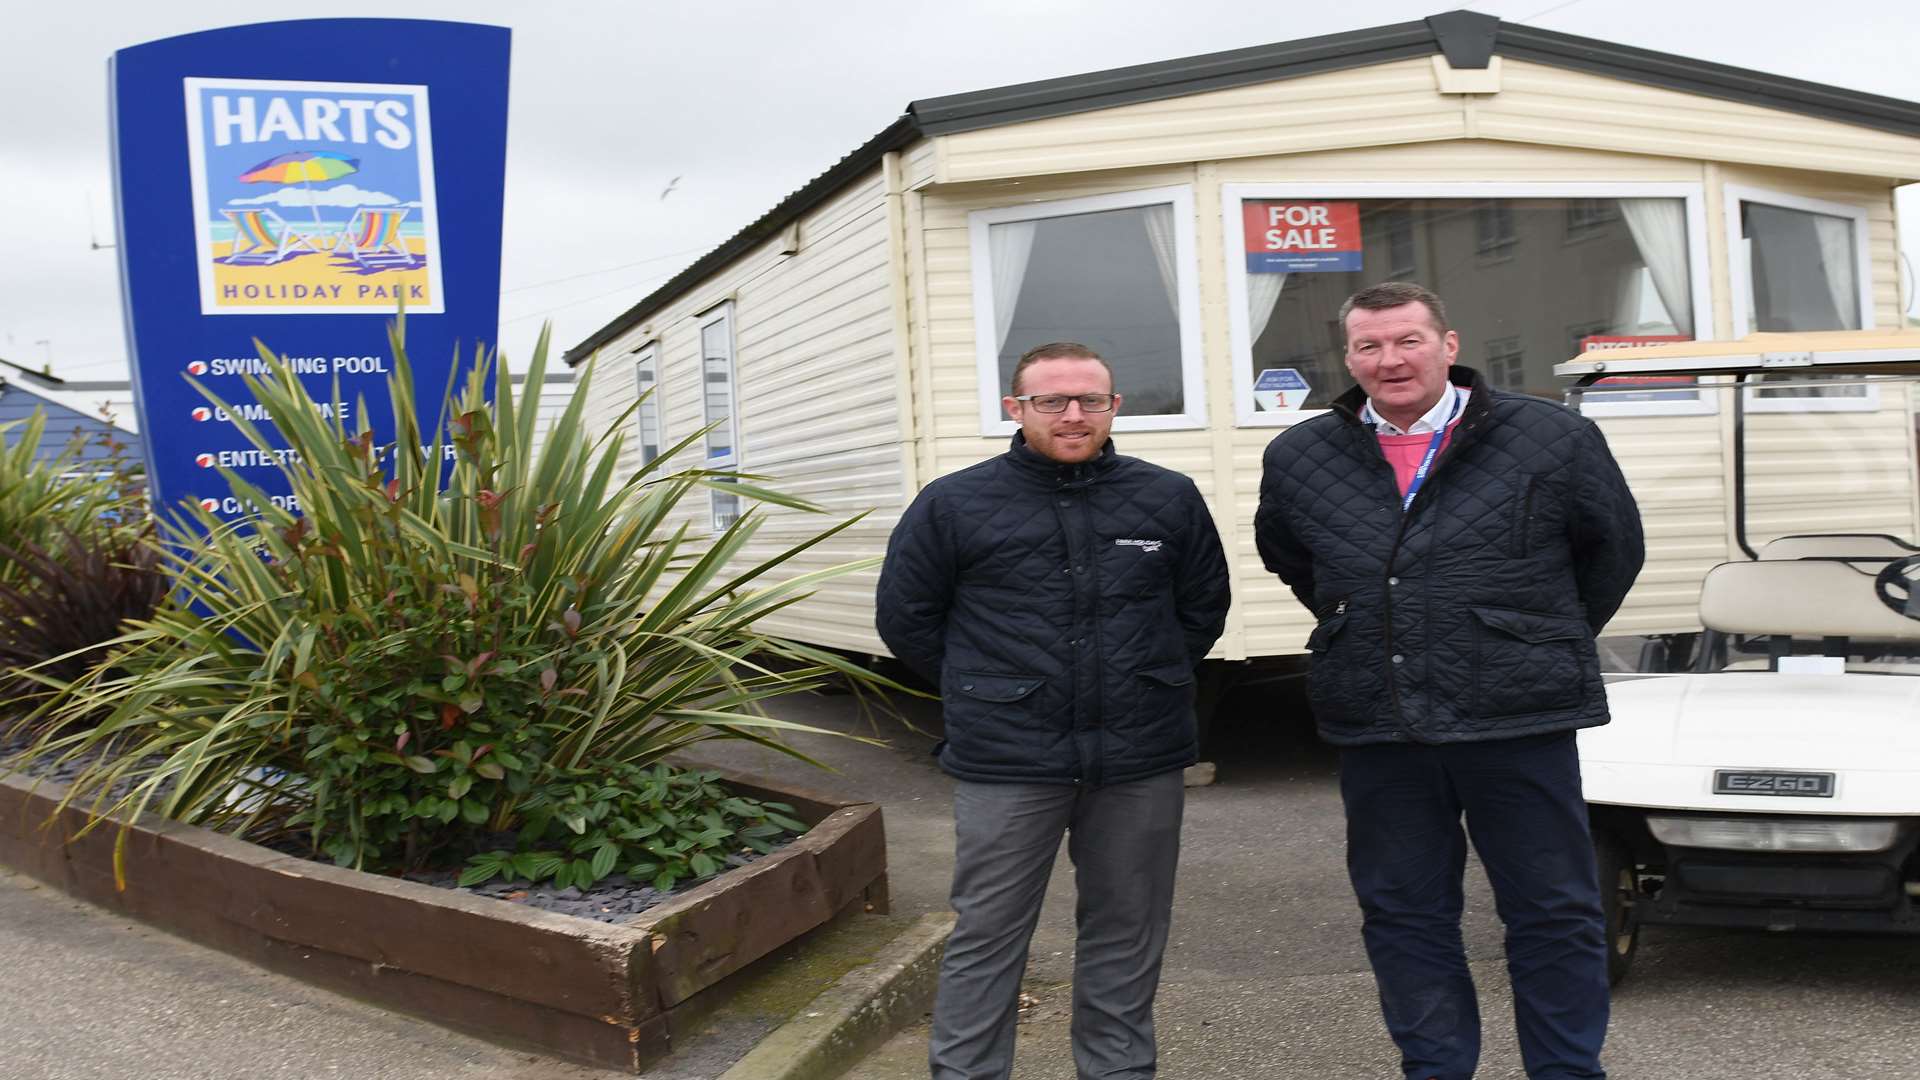 No sightings: Stuart McKay and Billy Ellis at Harts Holiday Park. Picture: Steve Finn Photography